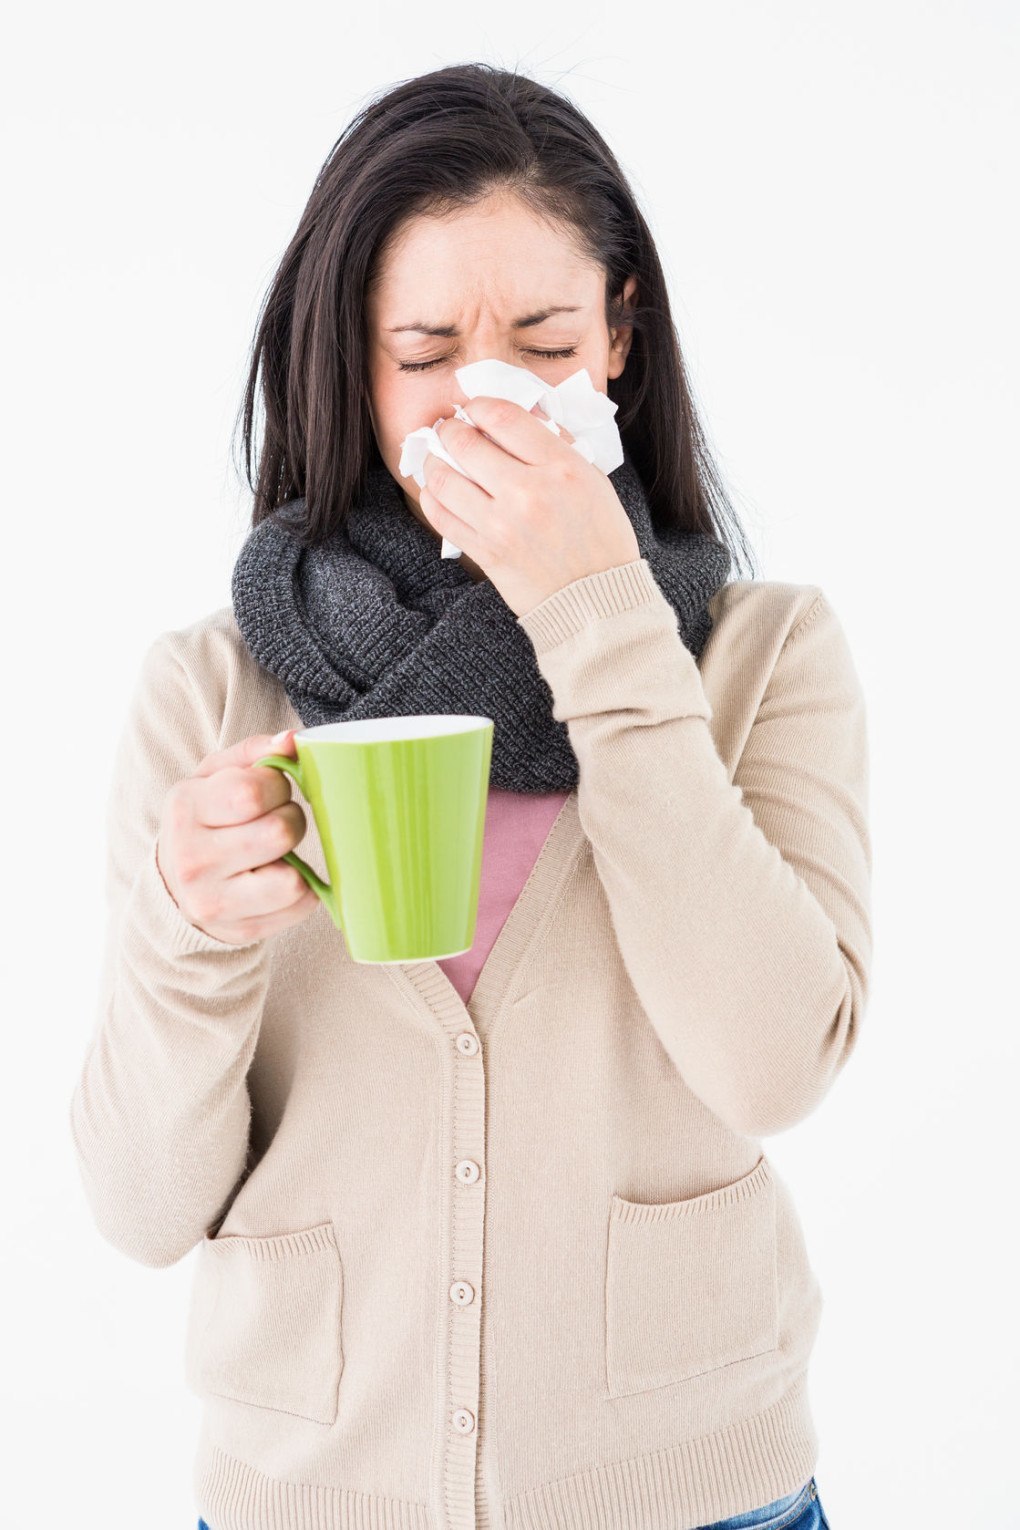 A woman sneezed as she holds her coffee